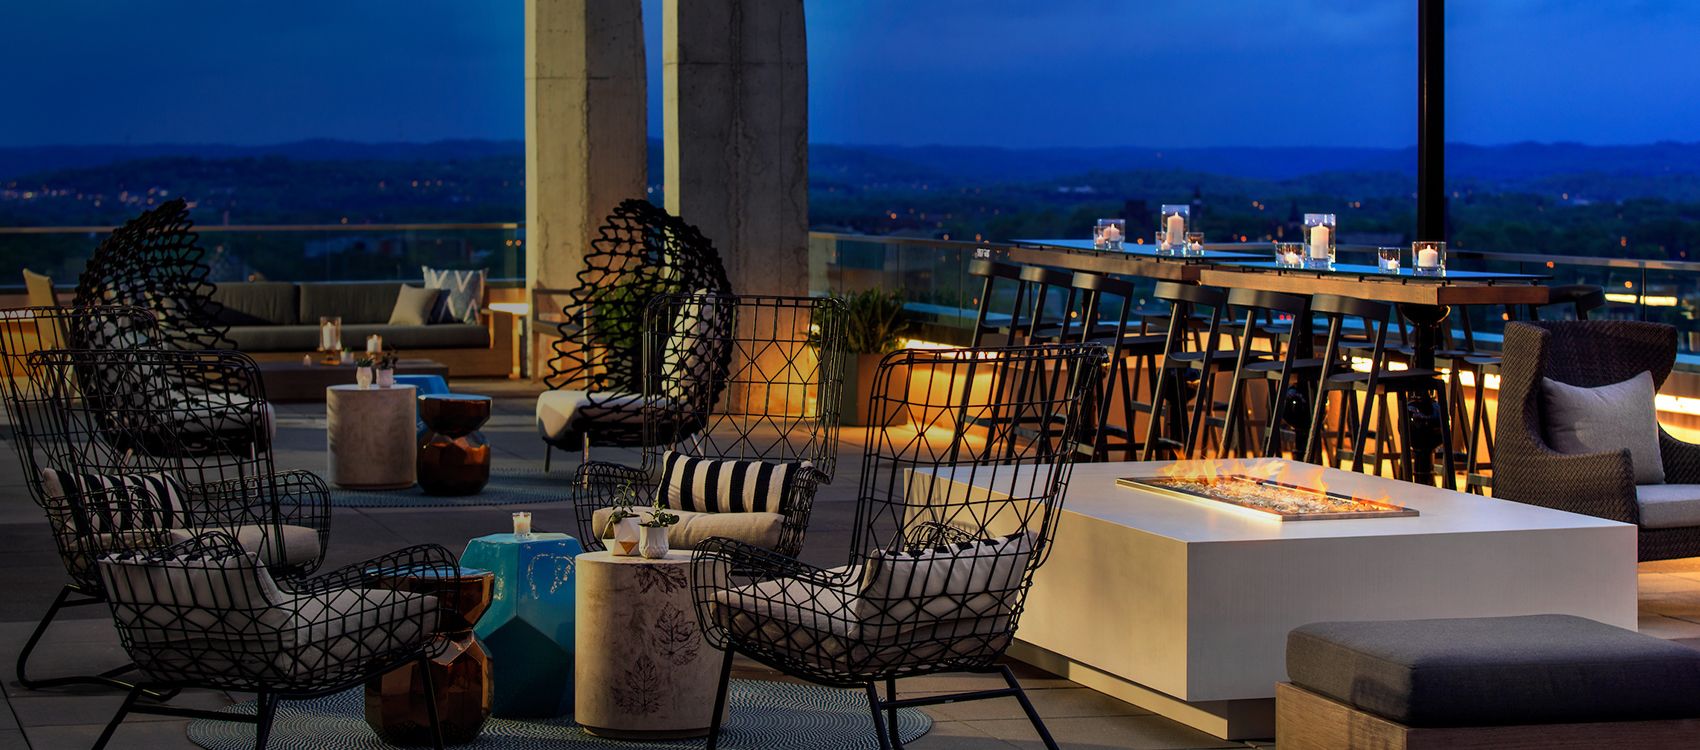 rooftop lounge seating with firepits and city views at night